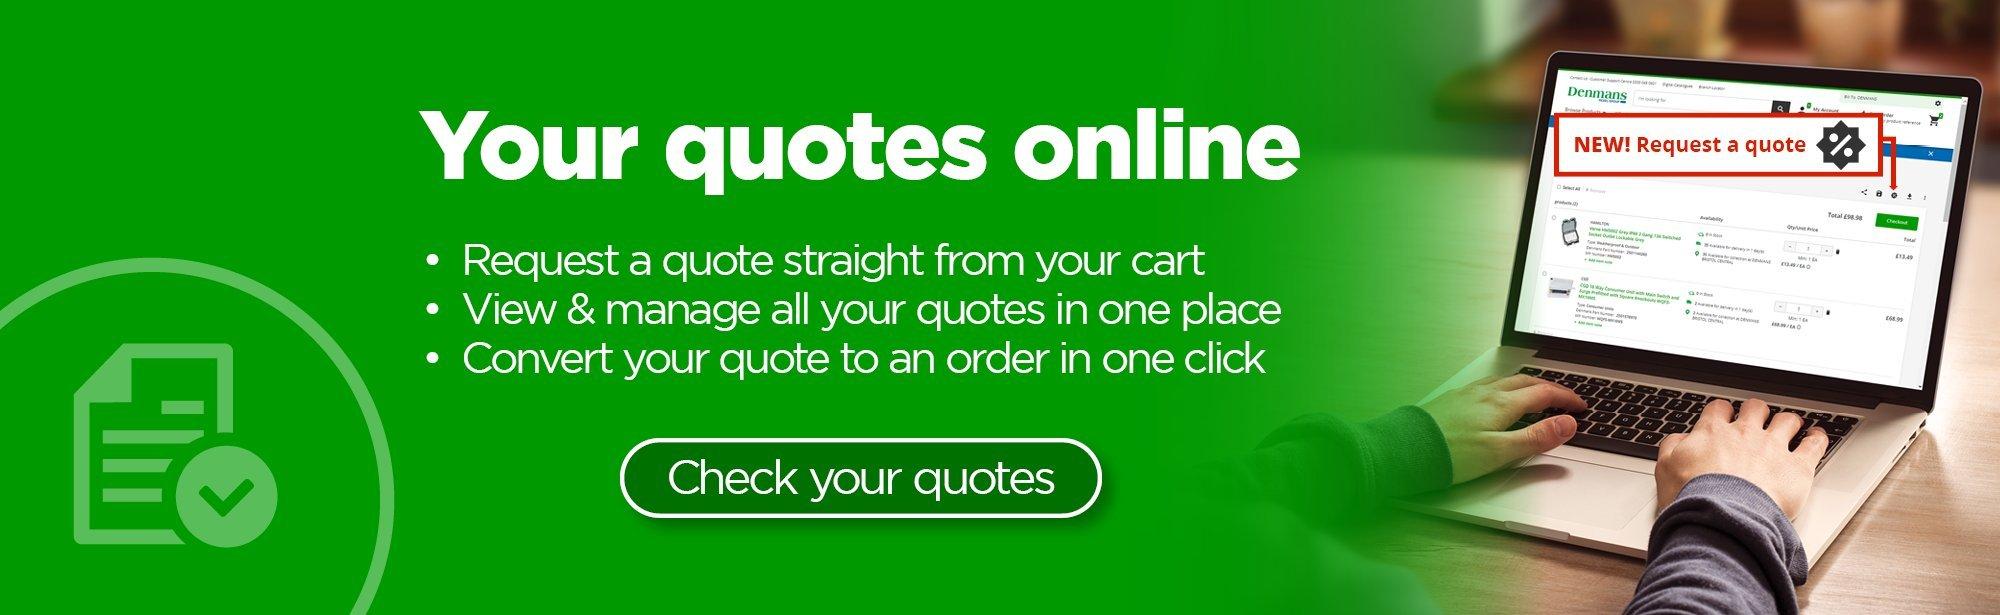 Your quotes online